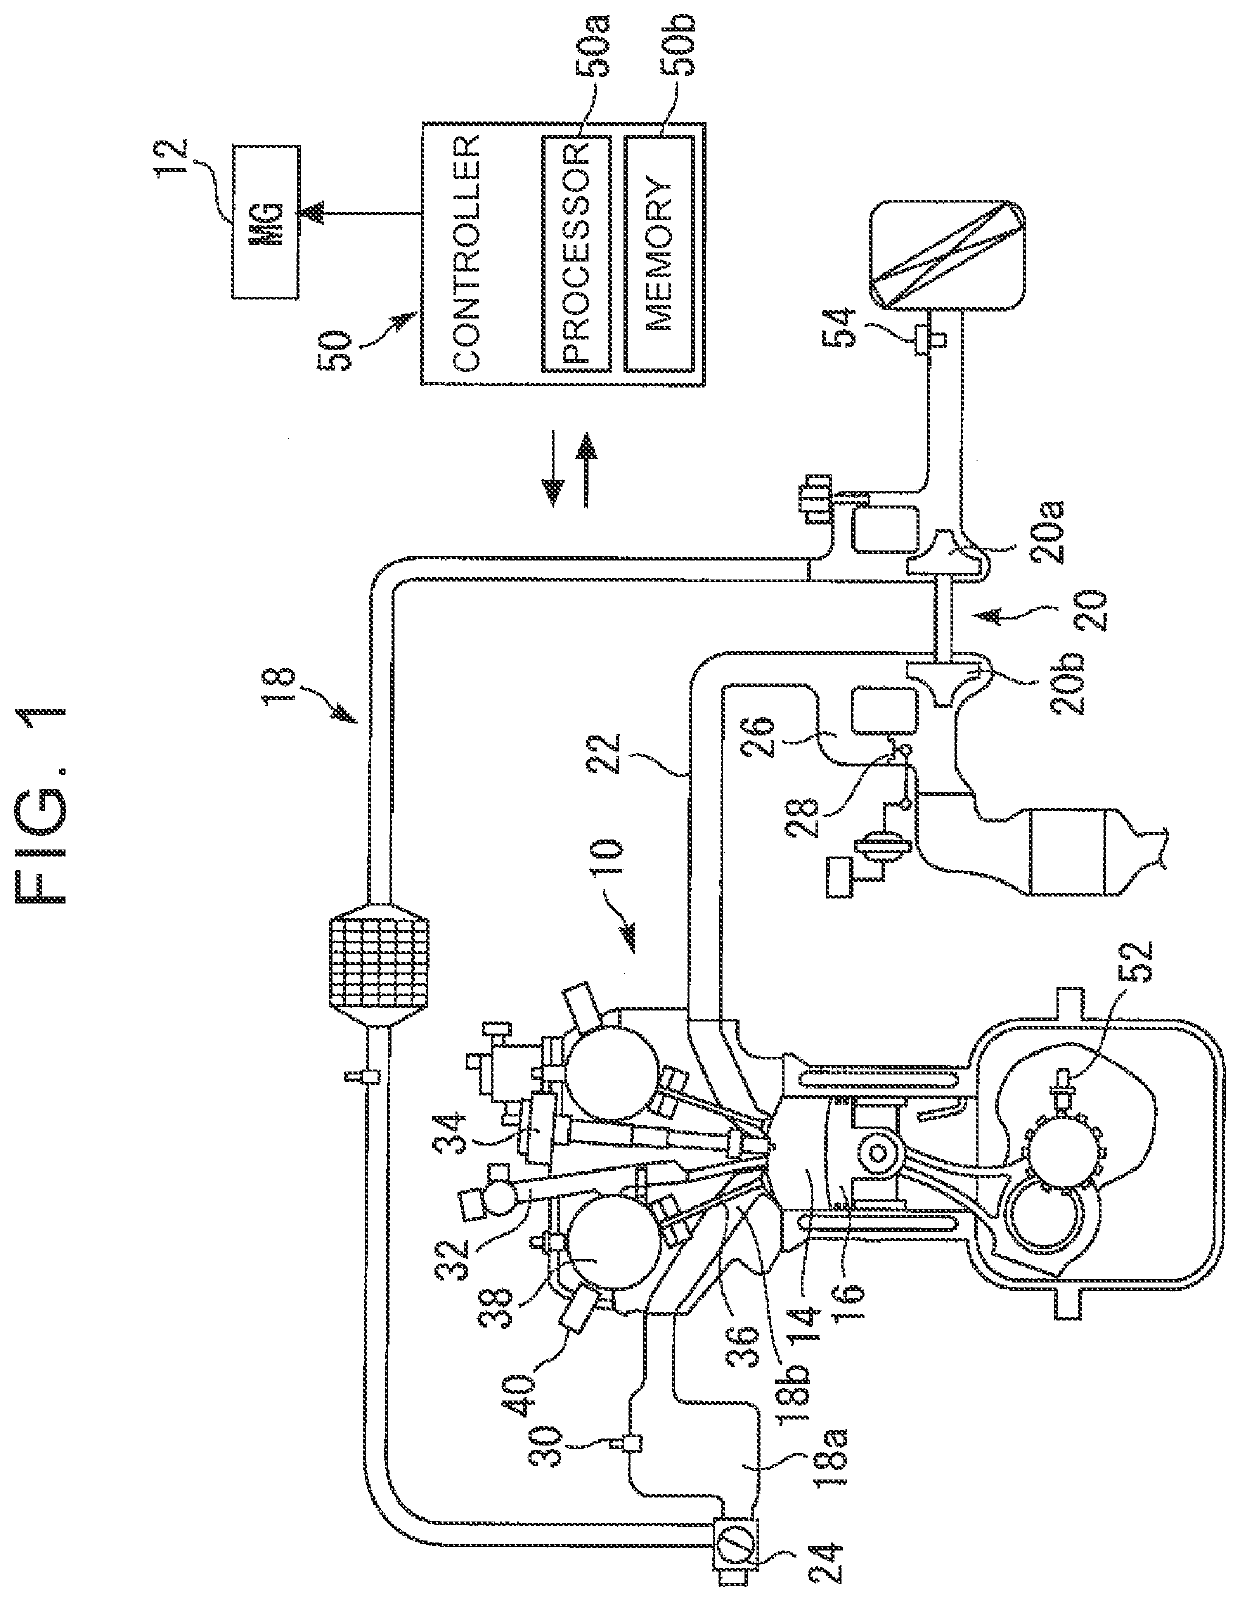 Control system of miller cycle engine and method of controlling miller cycle engine